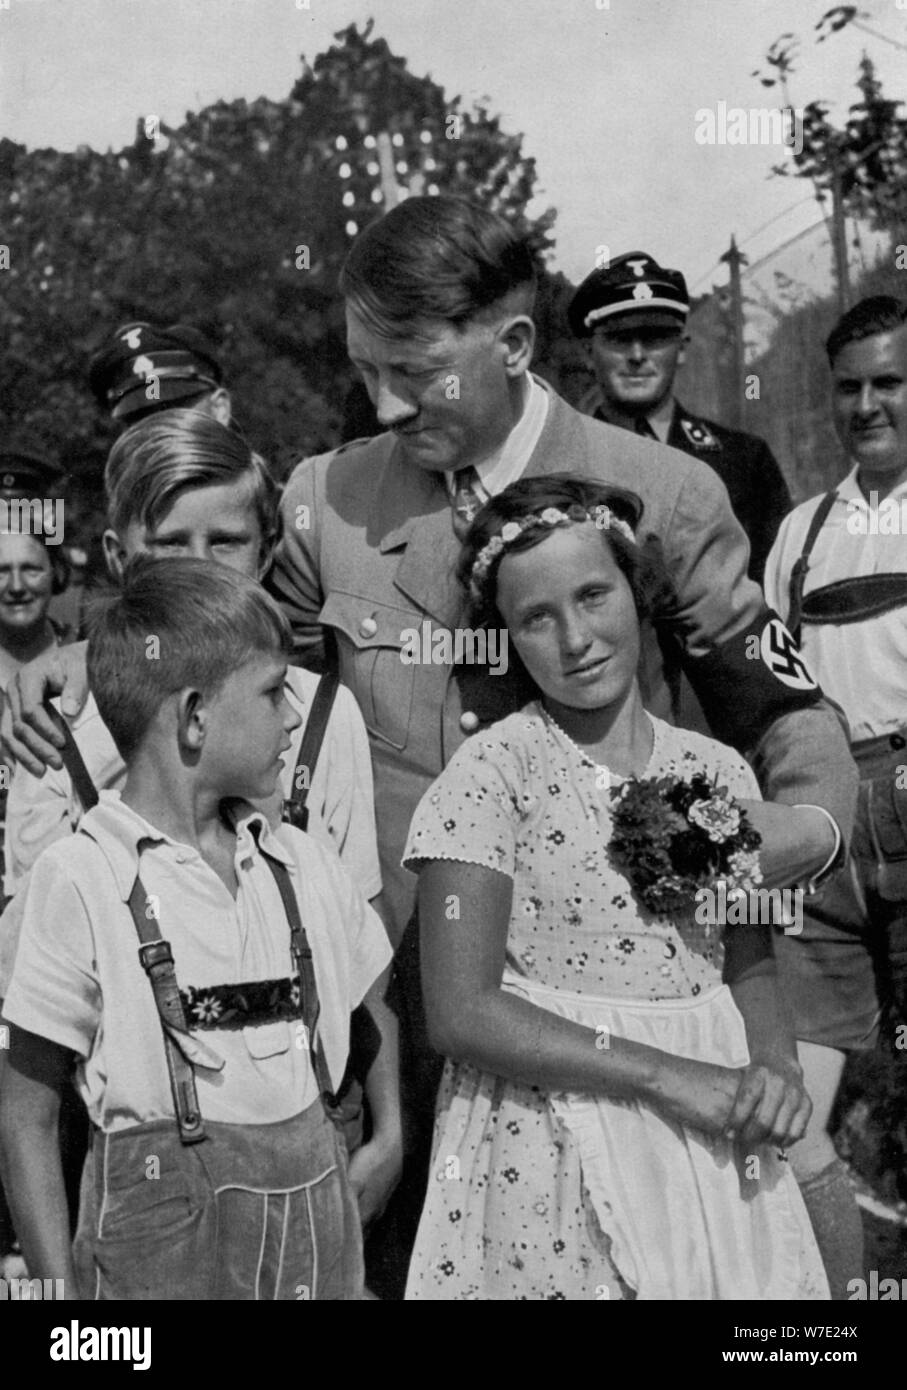 adolf-hitler-with-a-group-of-young-children-1936-artist-unknown-W7E24X.jpg